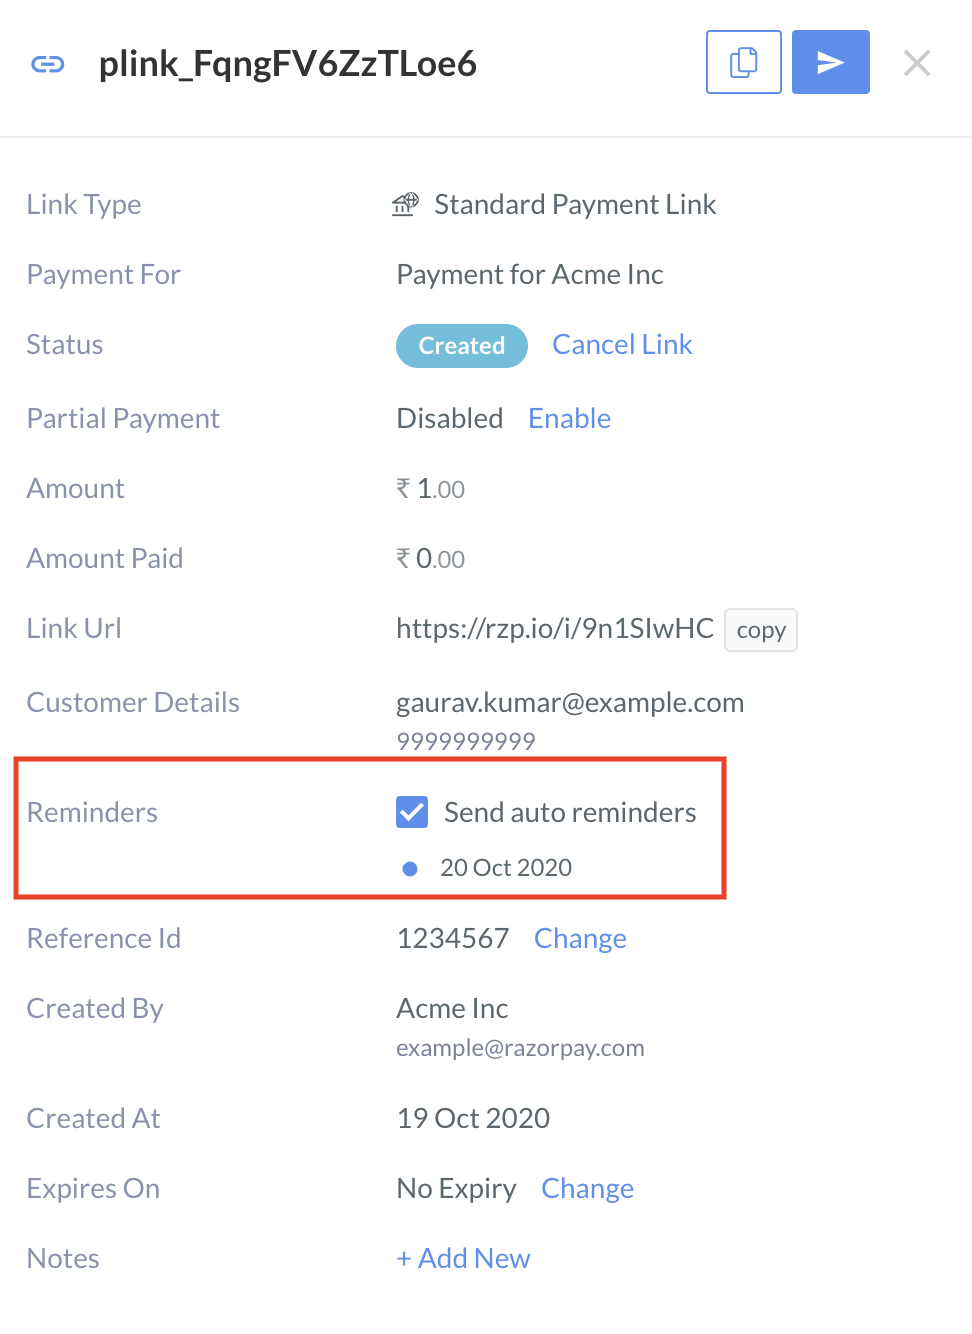 edit reminders for an issued payment link